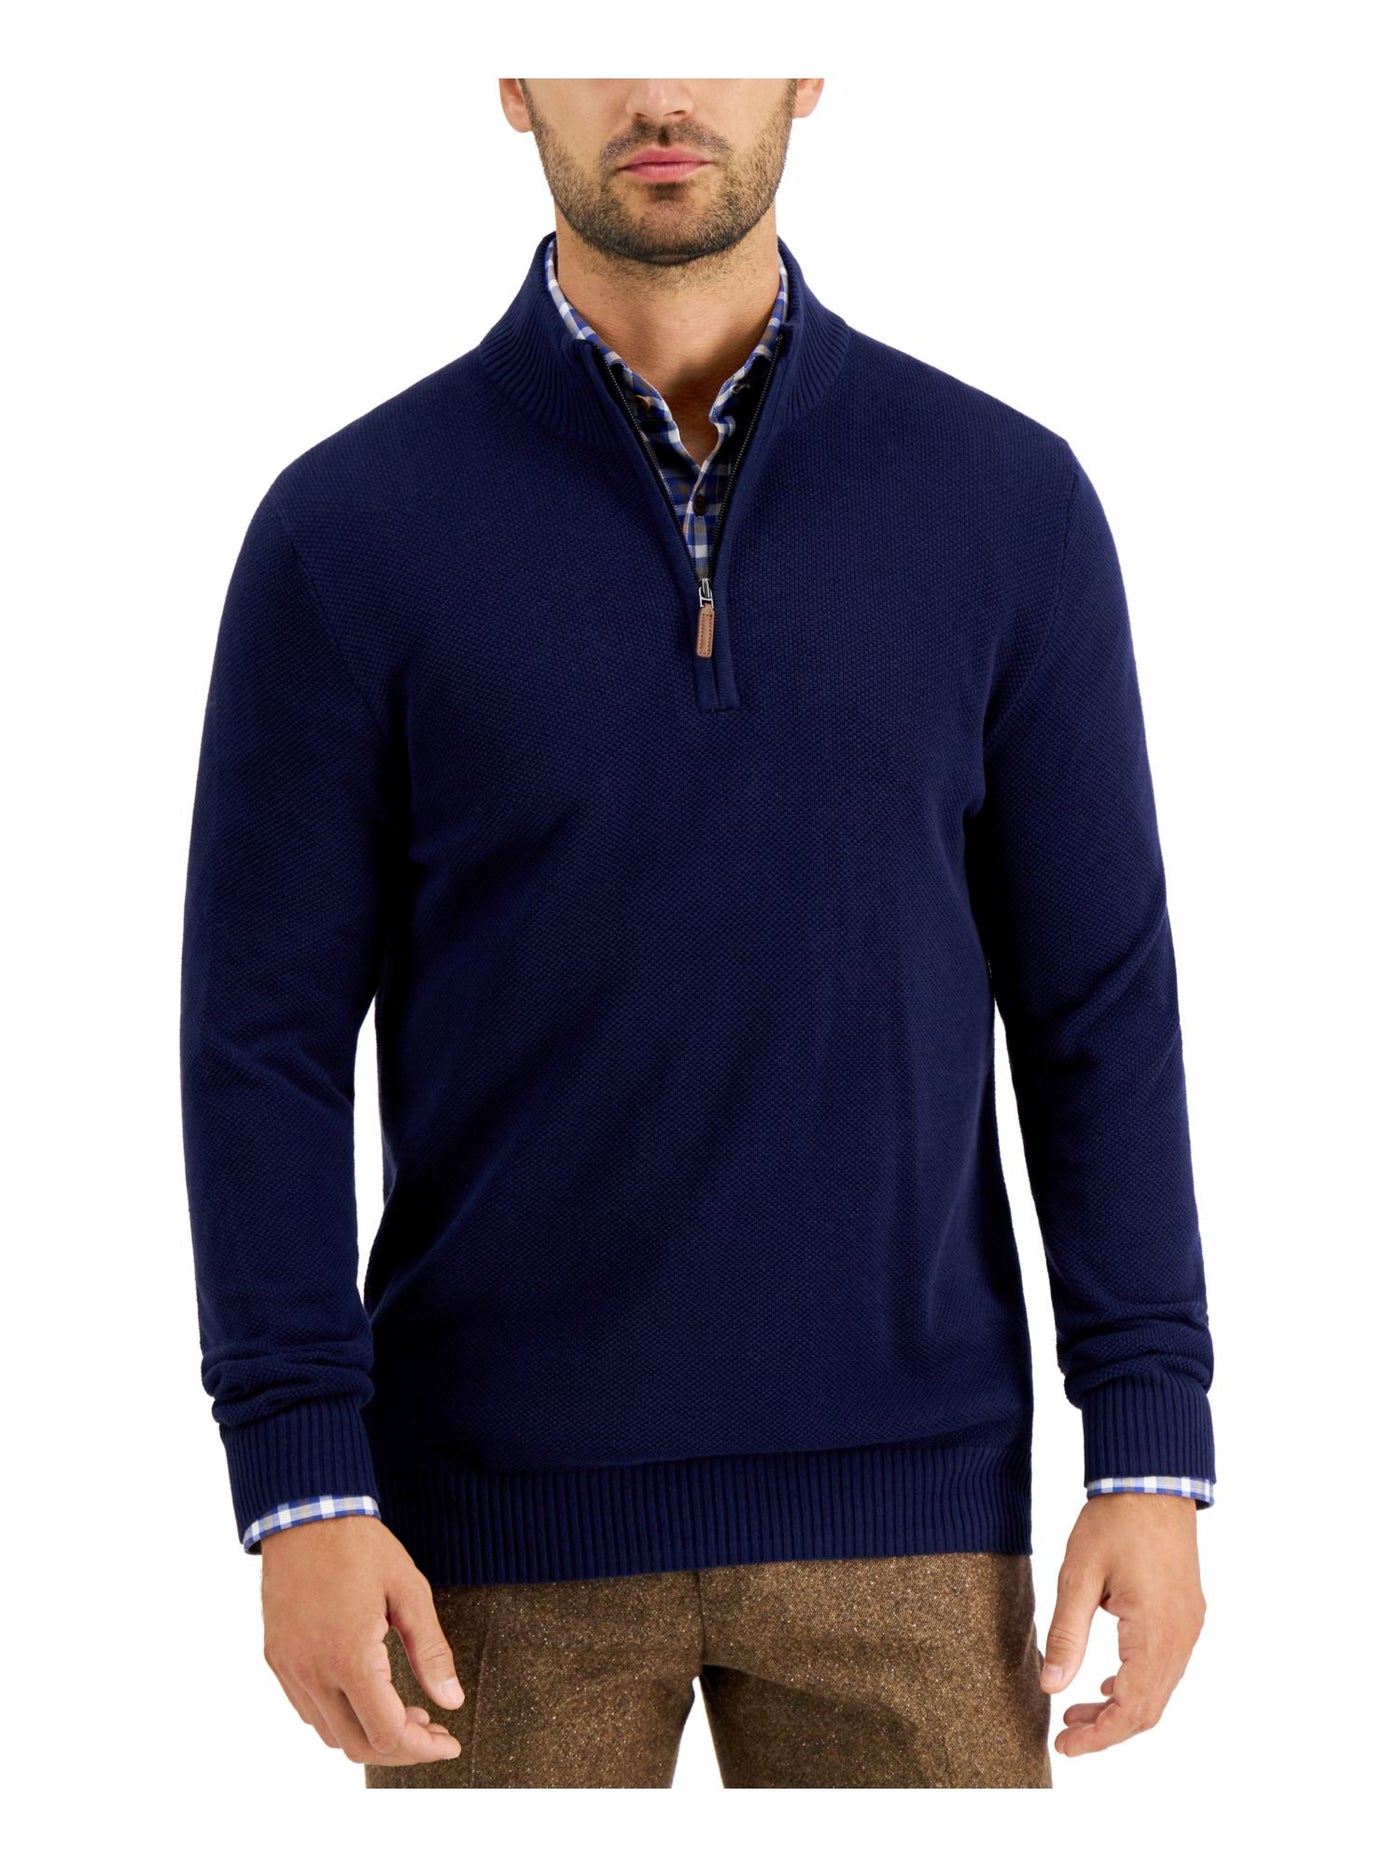 CLUBROOM Mens Navy Mock Neck Classic Fit Quarter-Zip Faux Leather Pullover Sweater M